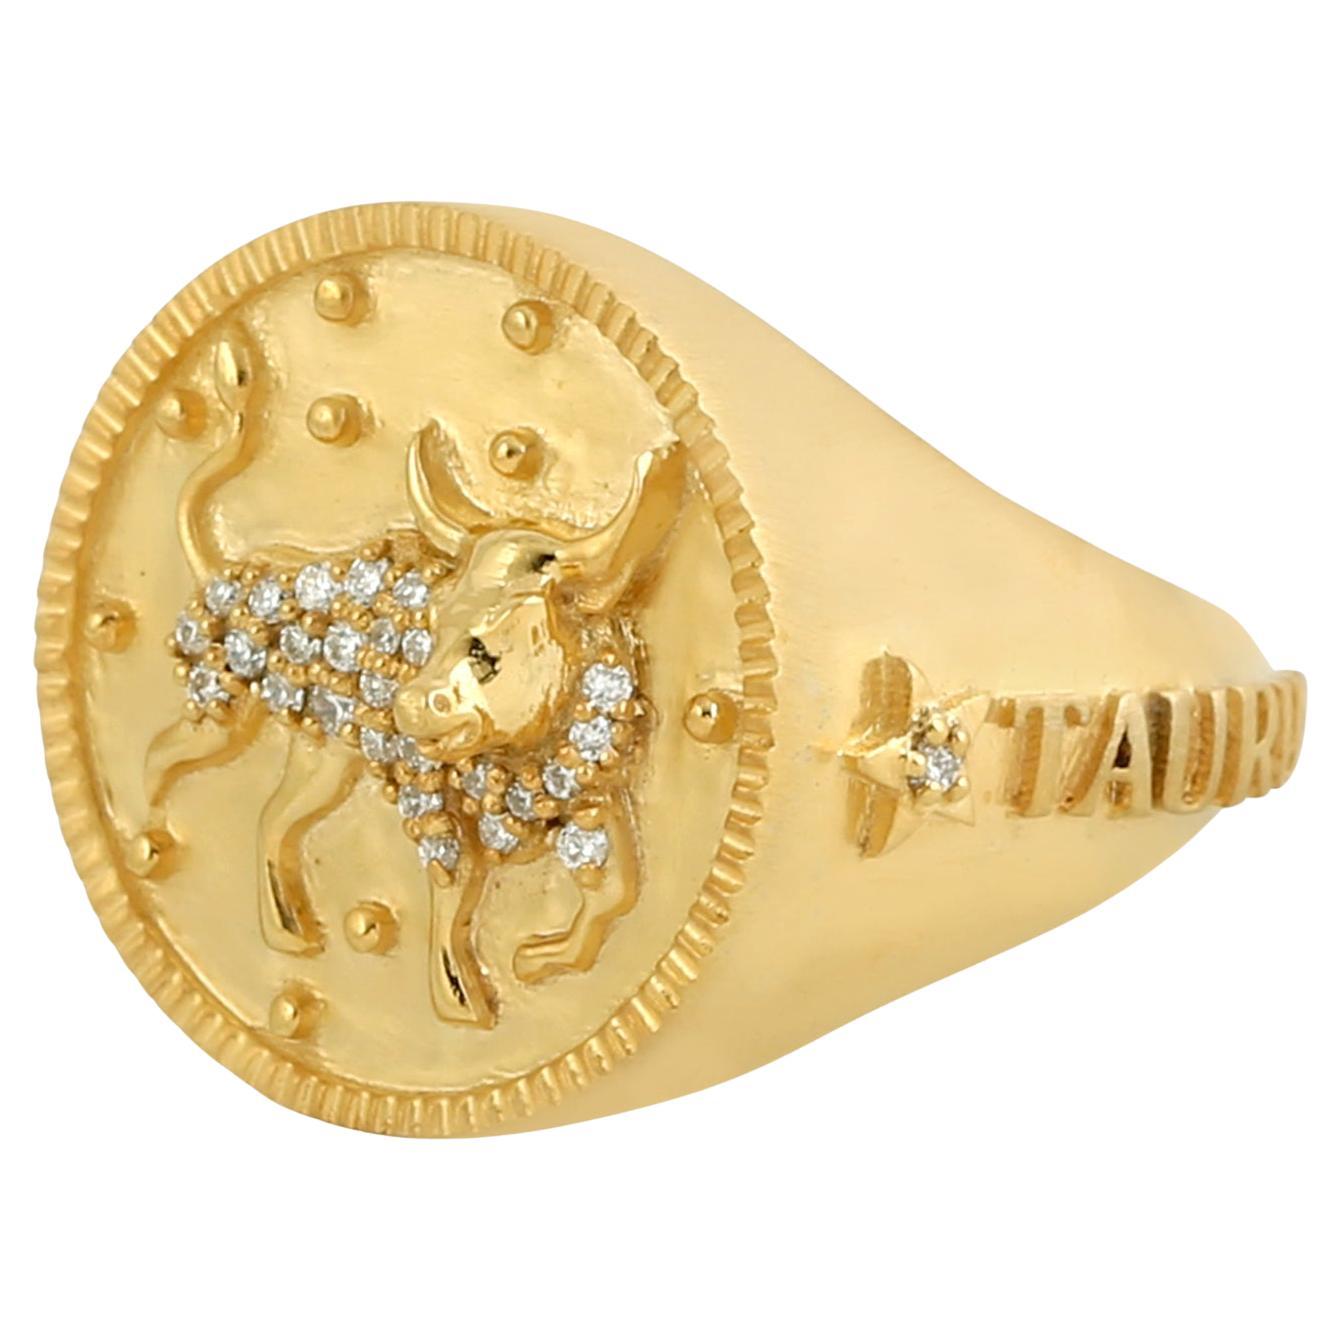 Taurus Zodiac Ring With Pave Diamonds Made in 14k Yellow Gold For Sale